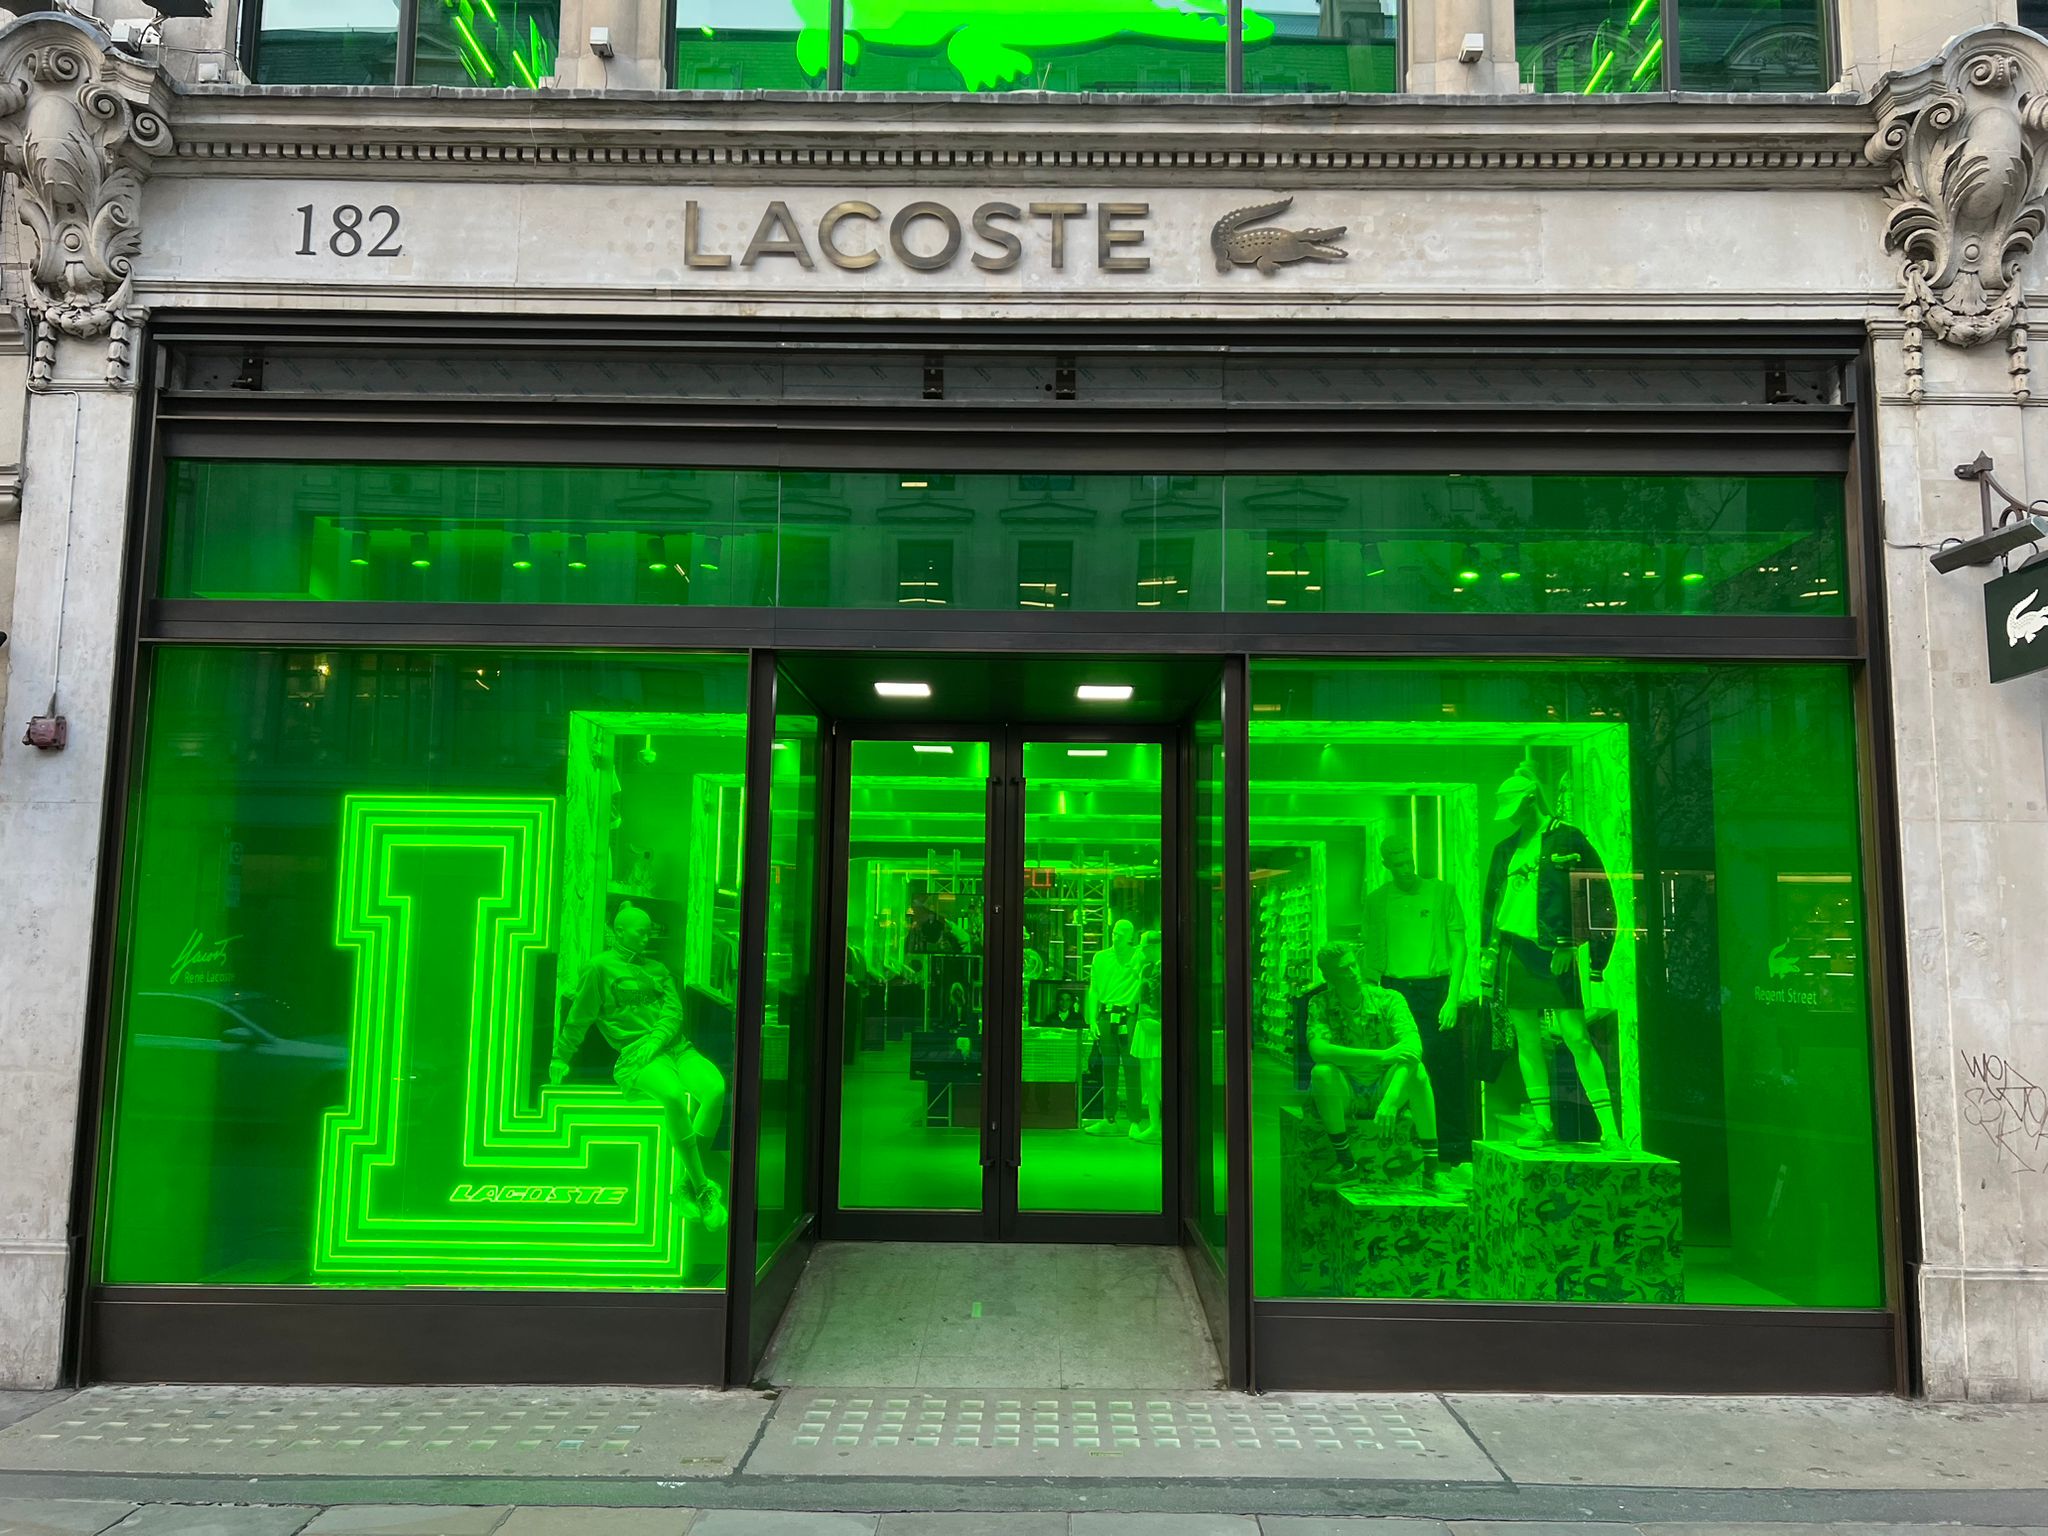 Lacoste on Regent Street with green window graphics